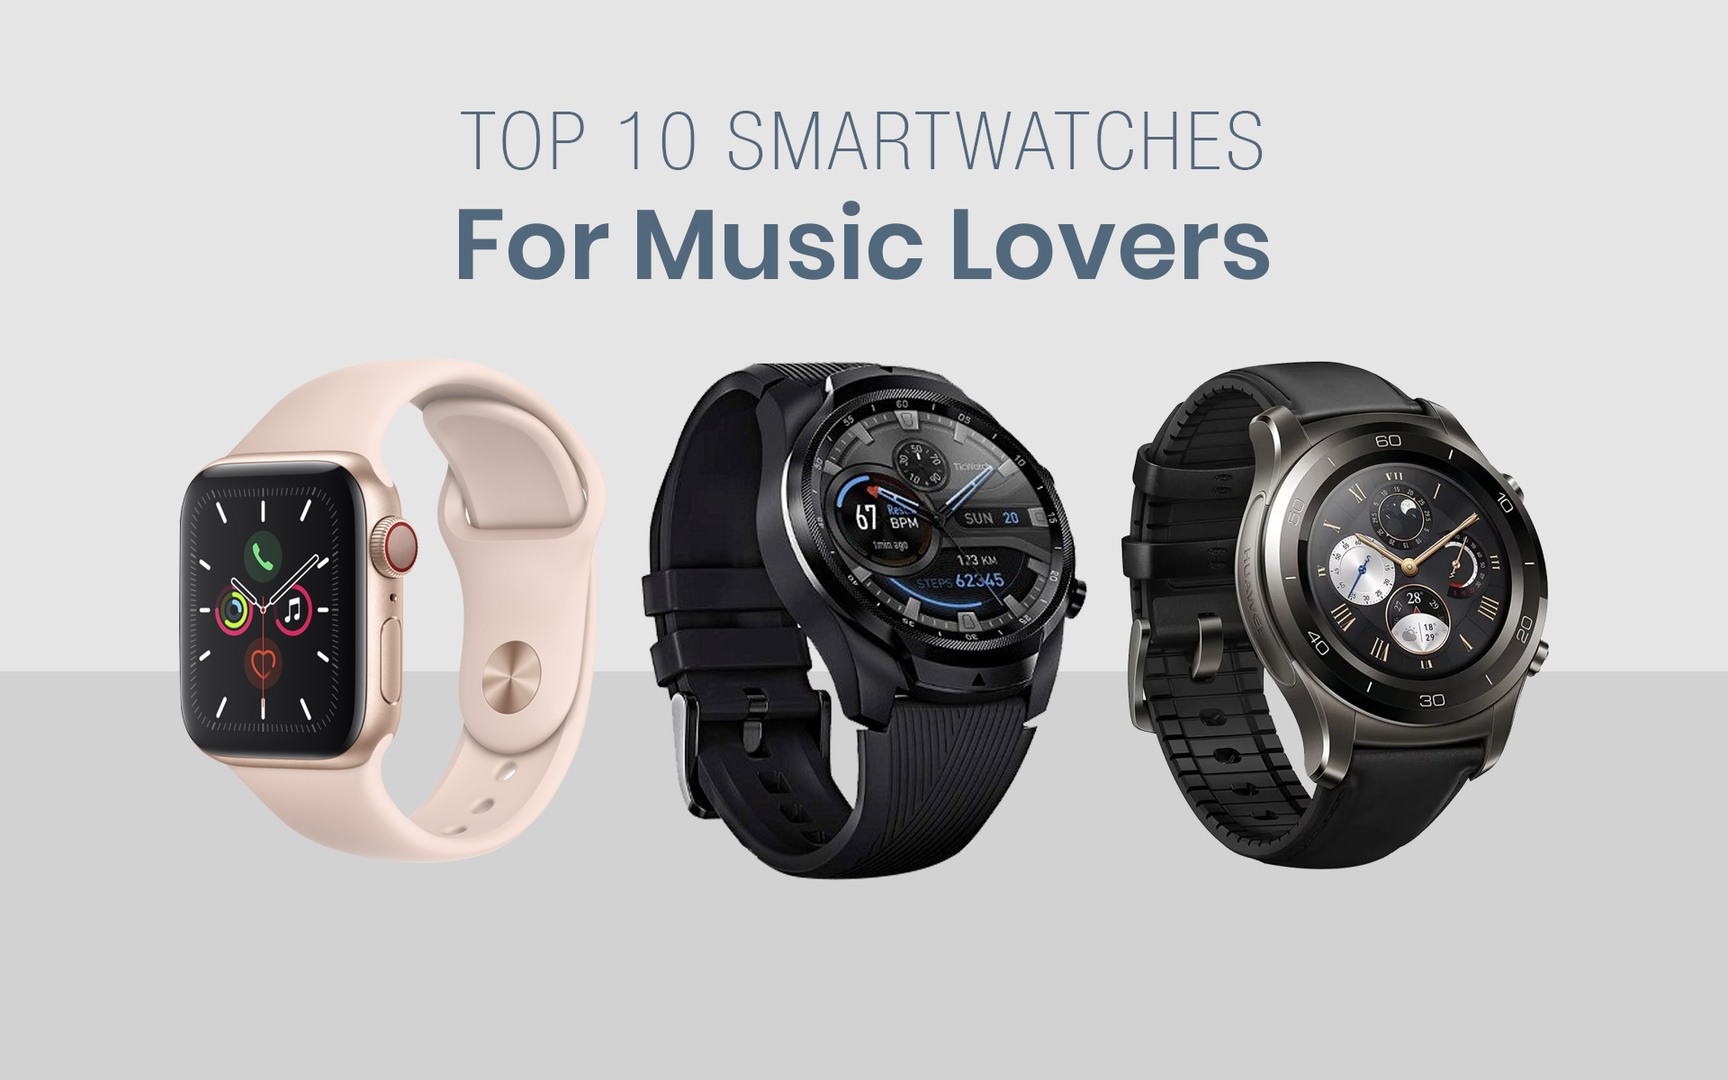 Top 10 Smartwatches For Music Lovers